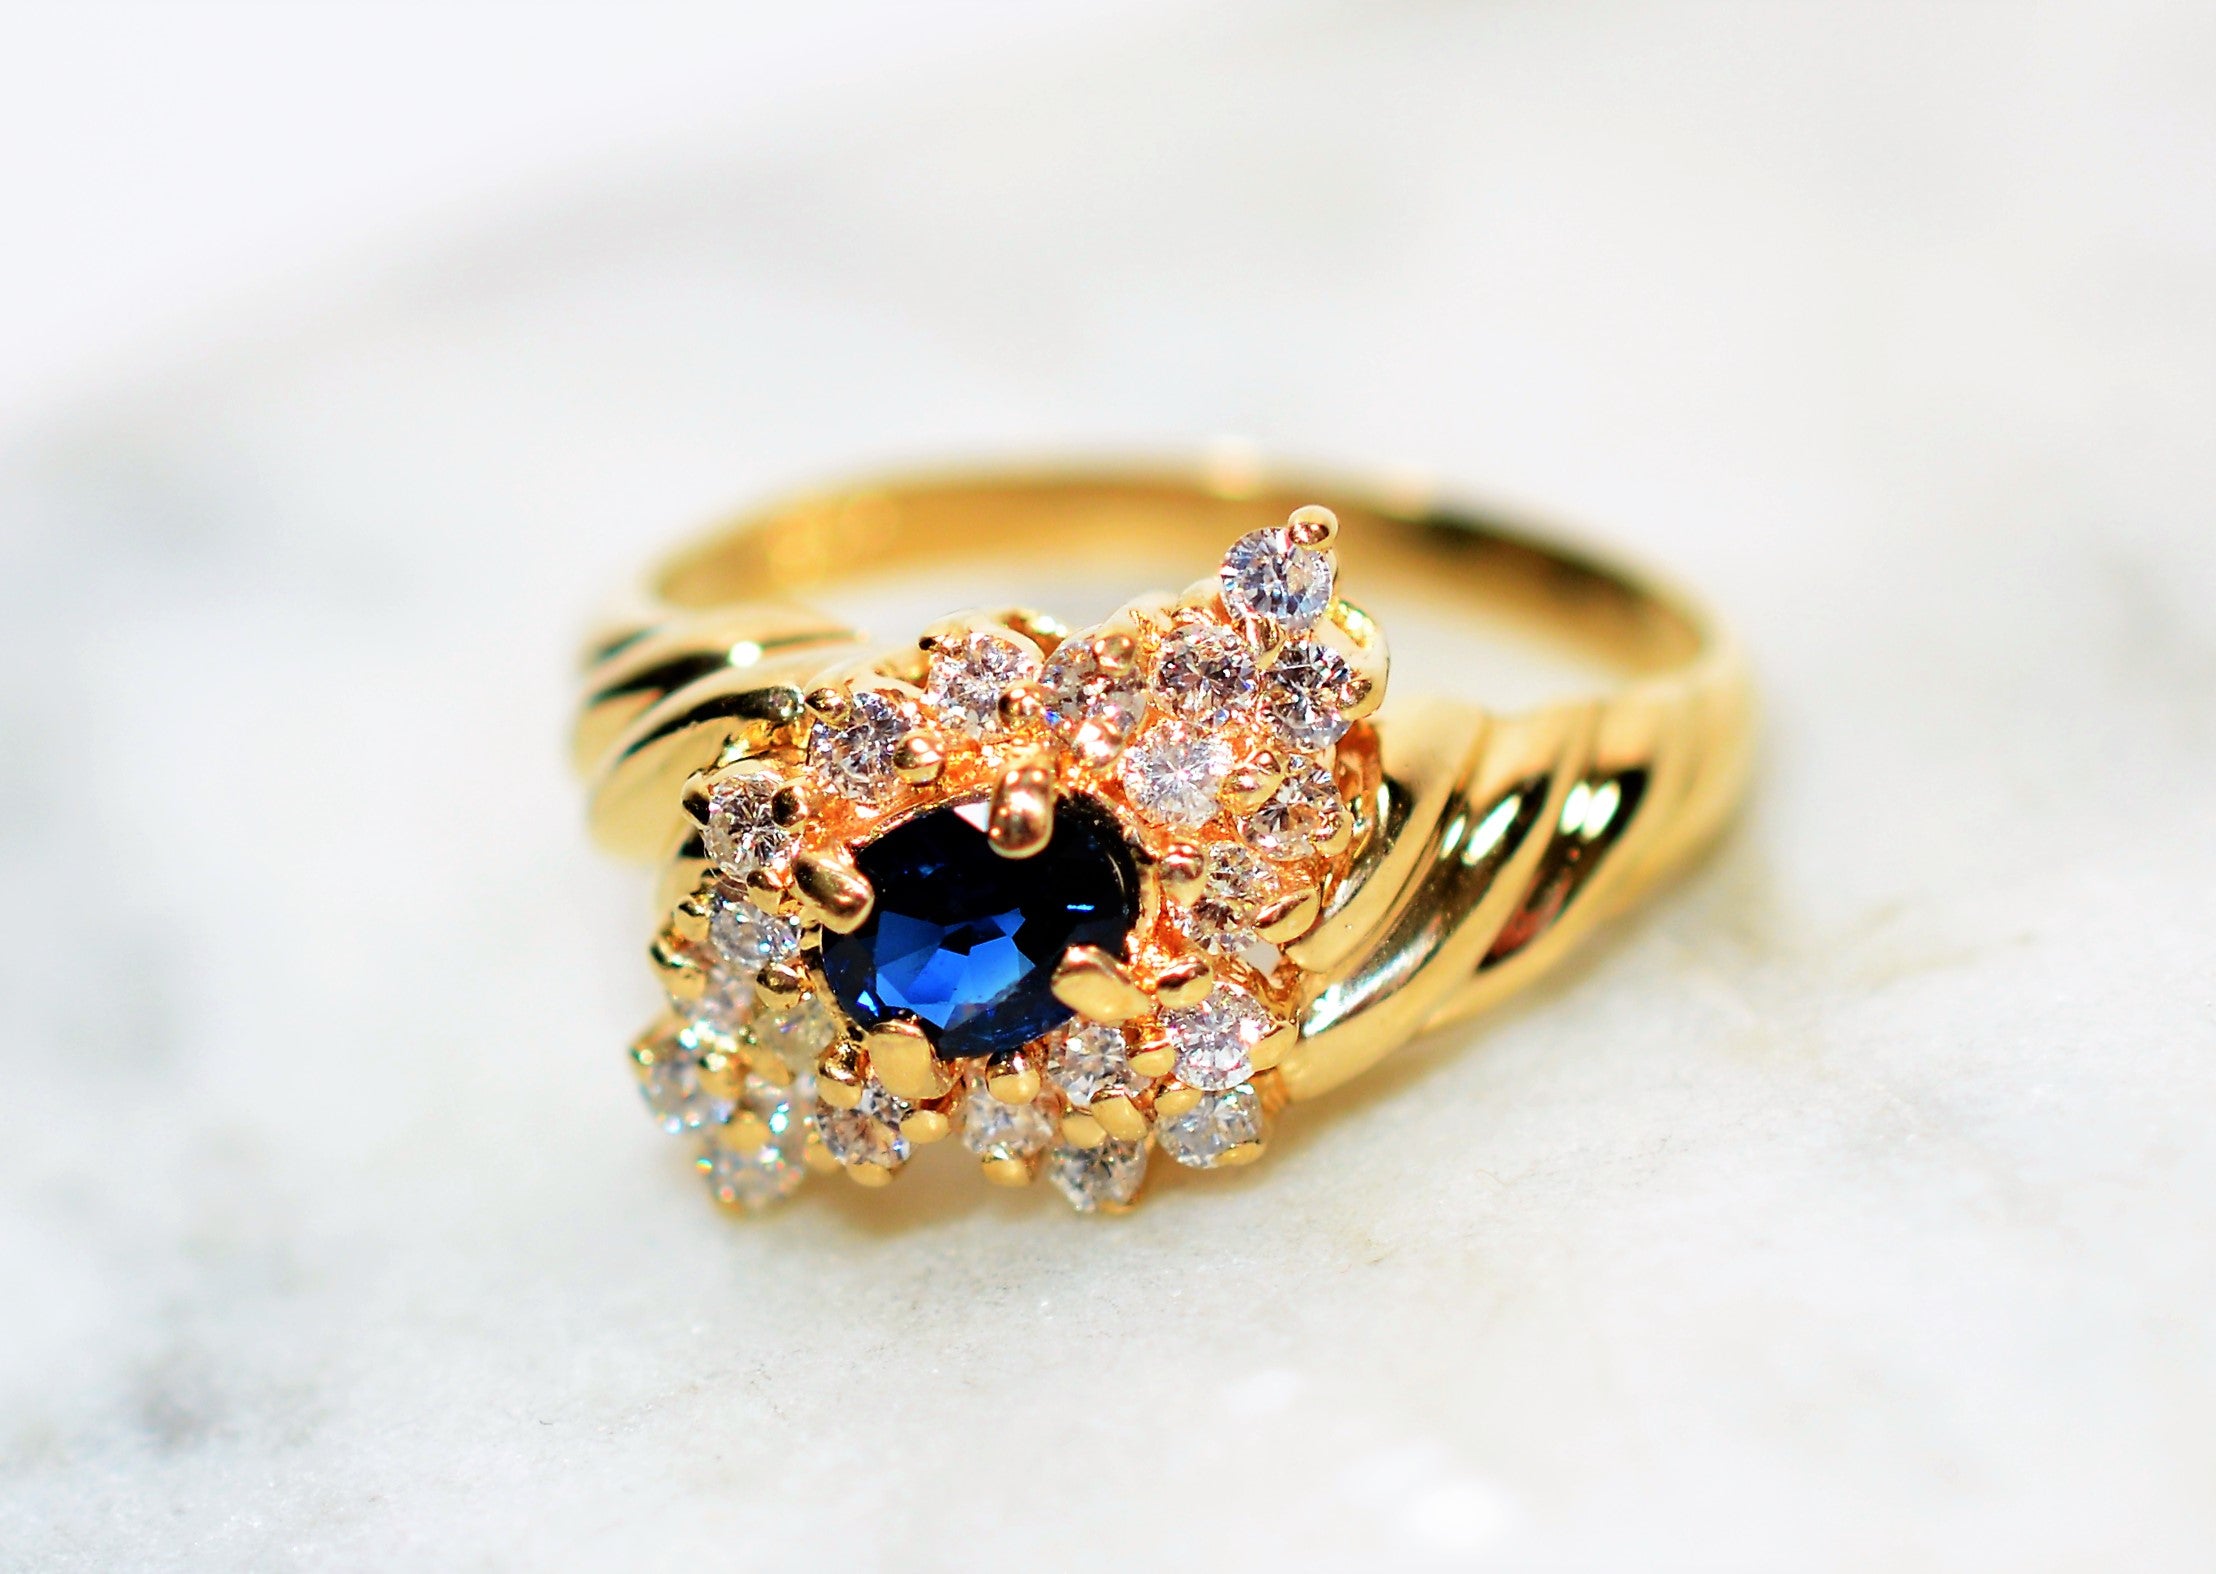 Natural Blue Sapphire & Diamond Ring 14K Solid Gold .76tcw Cluster Ring Vintage Ring Statement Ring September Birthstone Womens Ring Jewelry